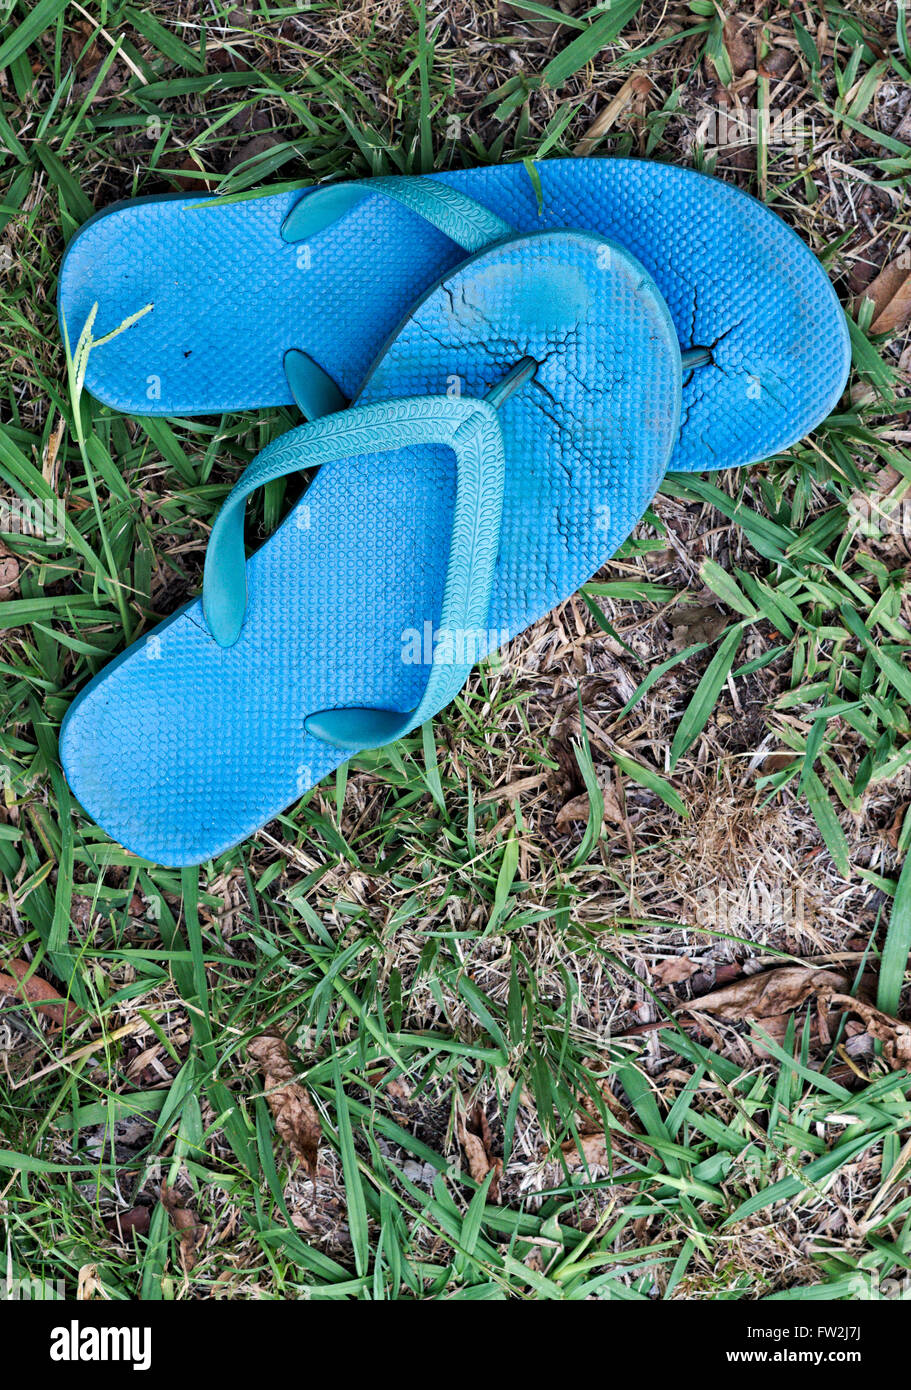 A pair of worn out blue thongs/flip flops against worn down lawn grass. Stock Photo